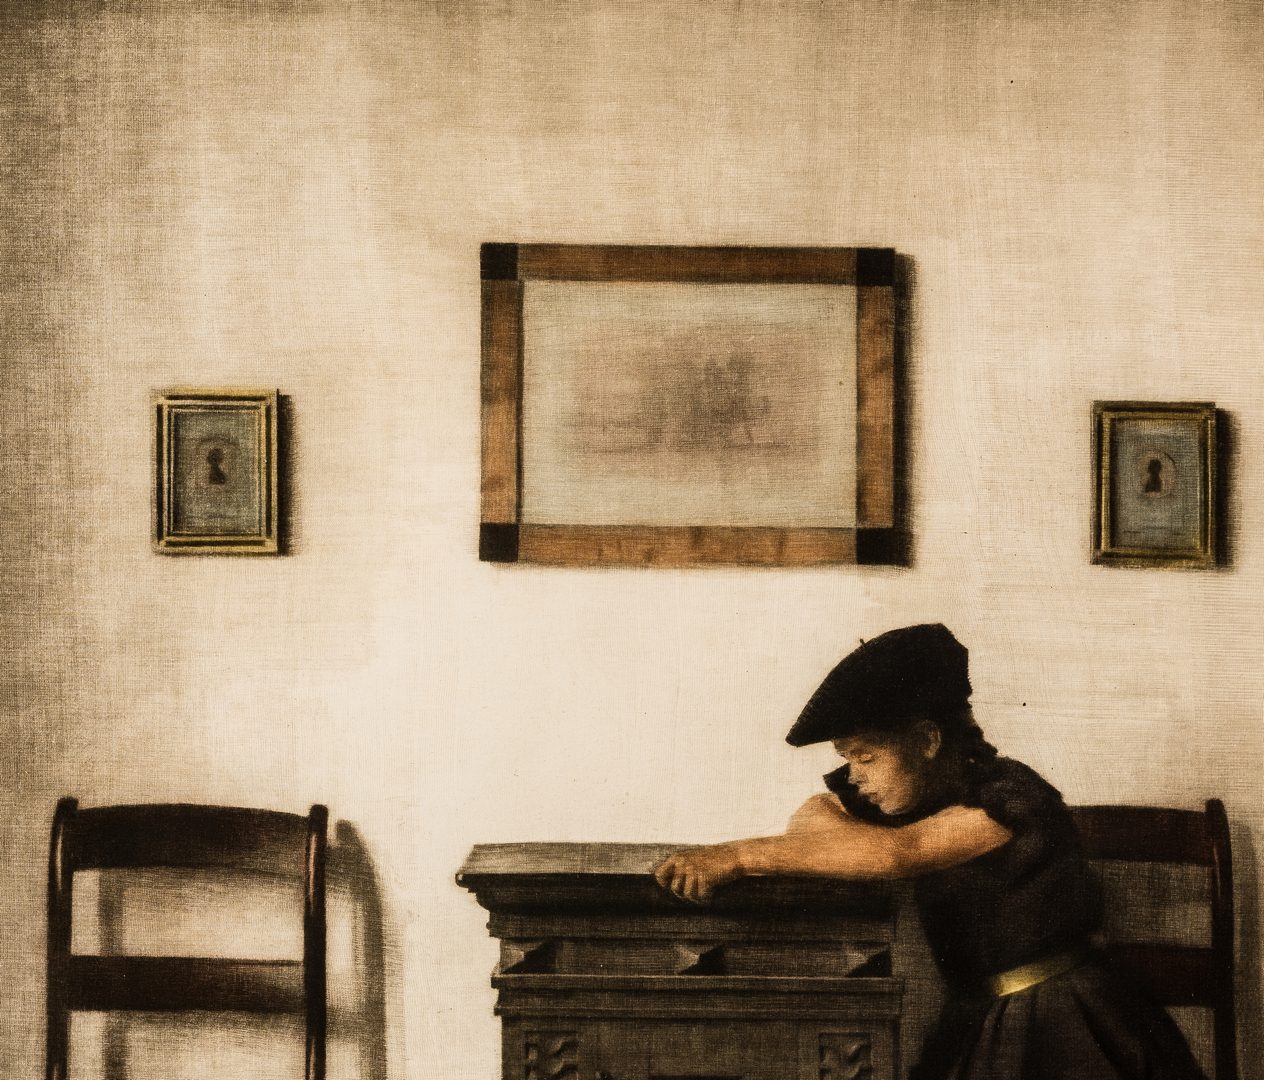 Lot 591: Pair of Peter Ilsted Mezzotints, "The Rainy Day" & "Little Girl with Flat Cap"